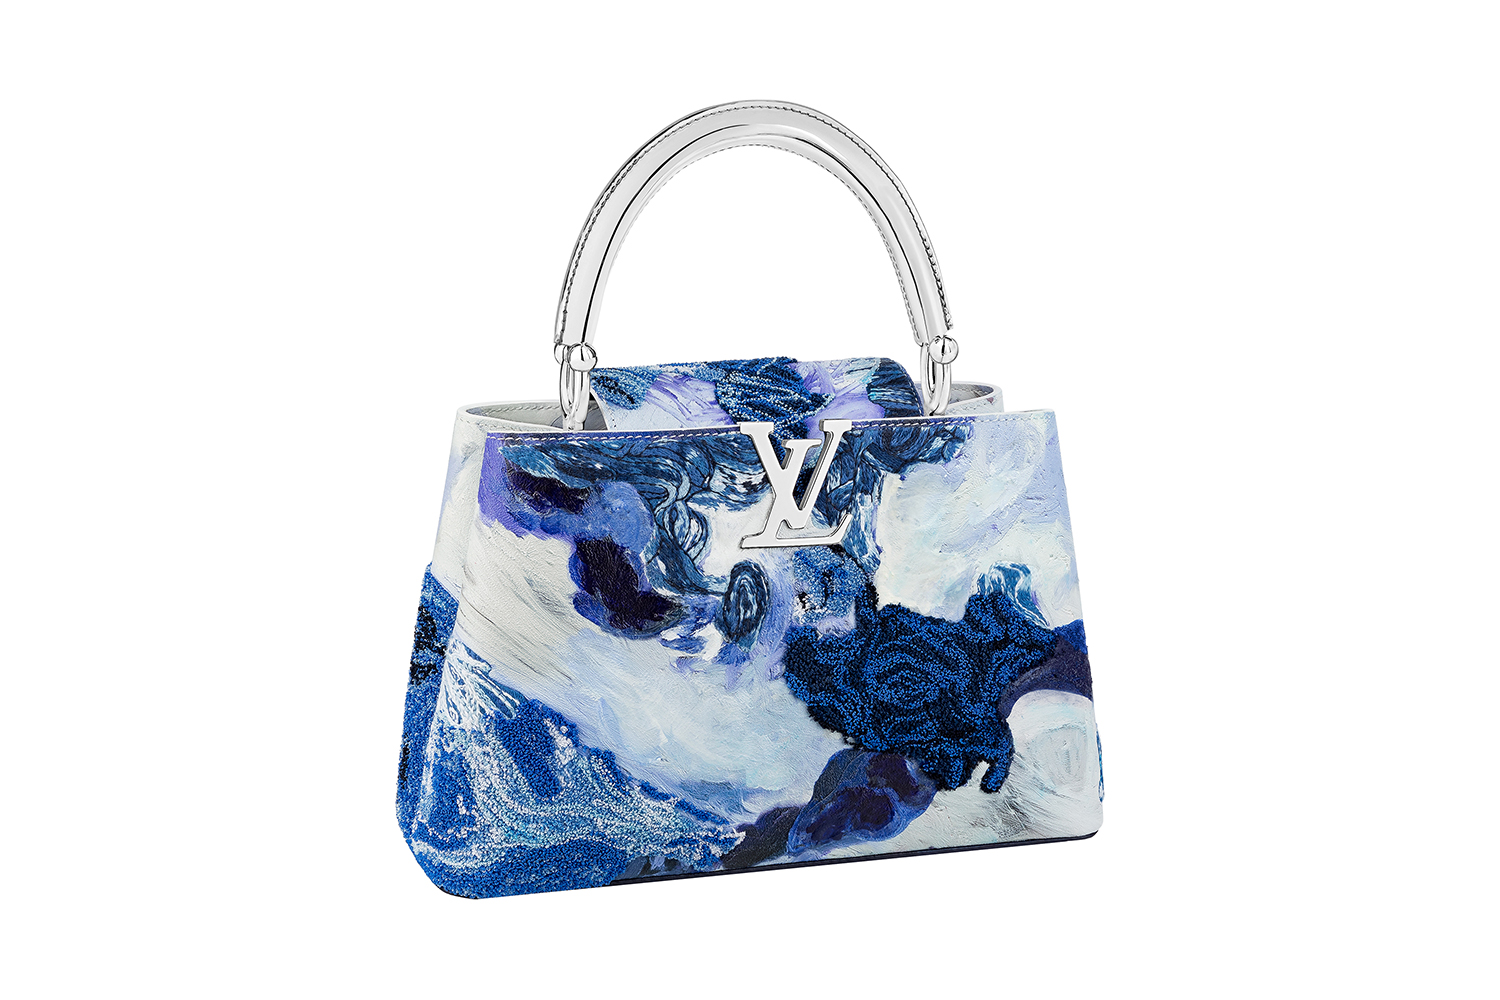 Louis Vuitton introduces the ArtyCapucines